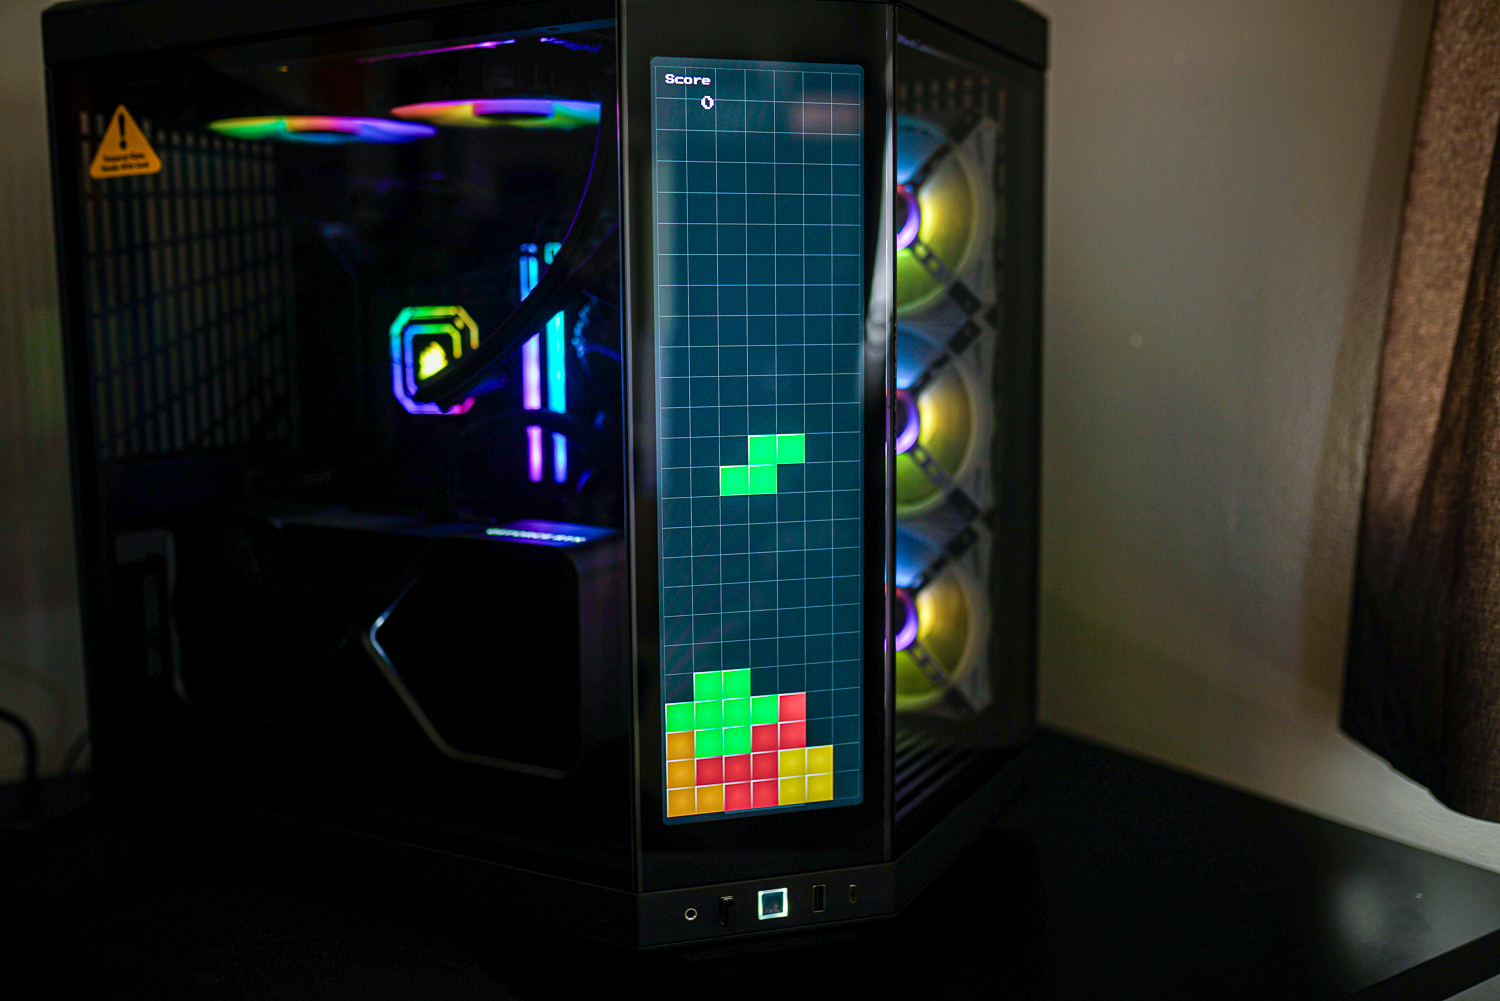 This PC case has a touchscreen, and it's not just a gimmick